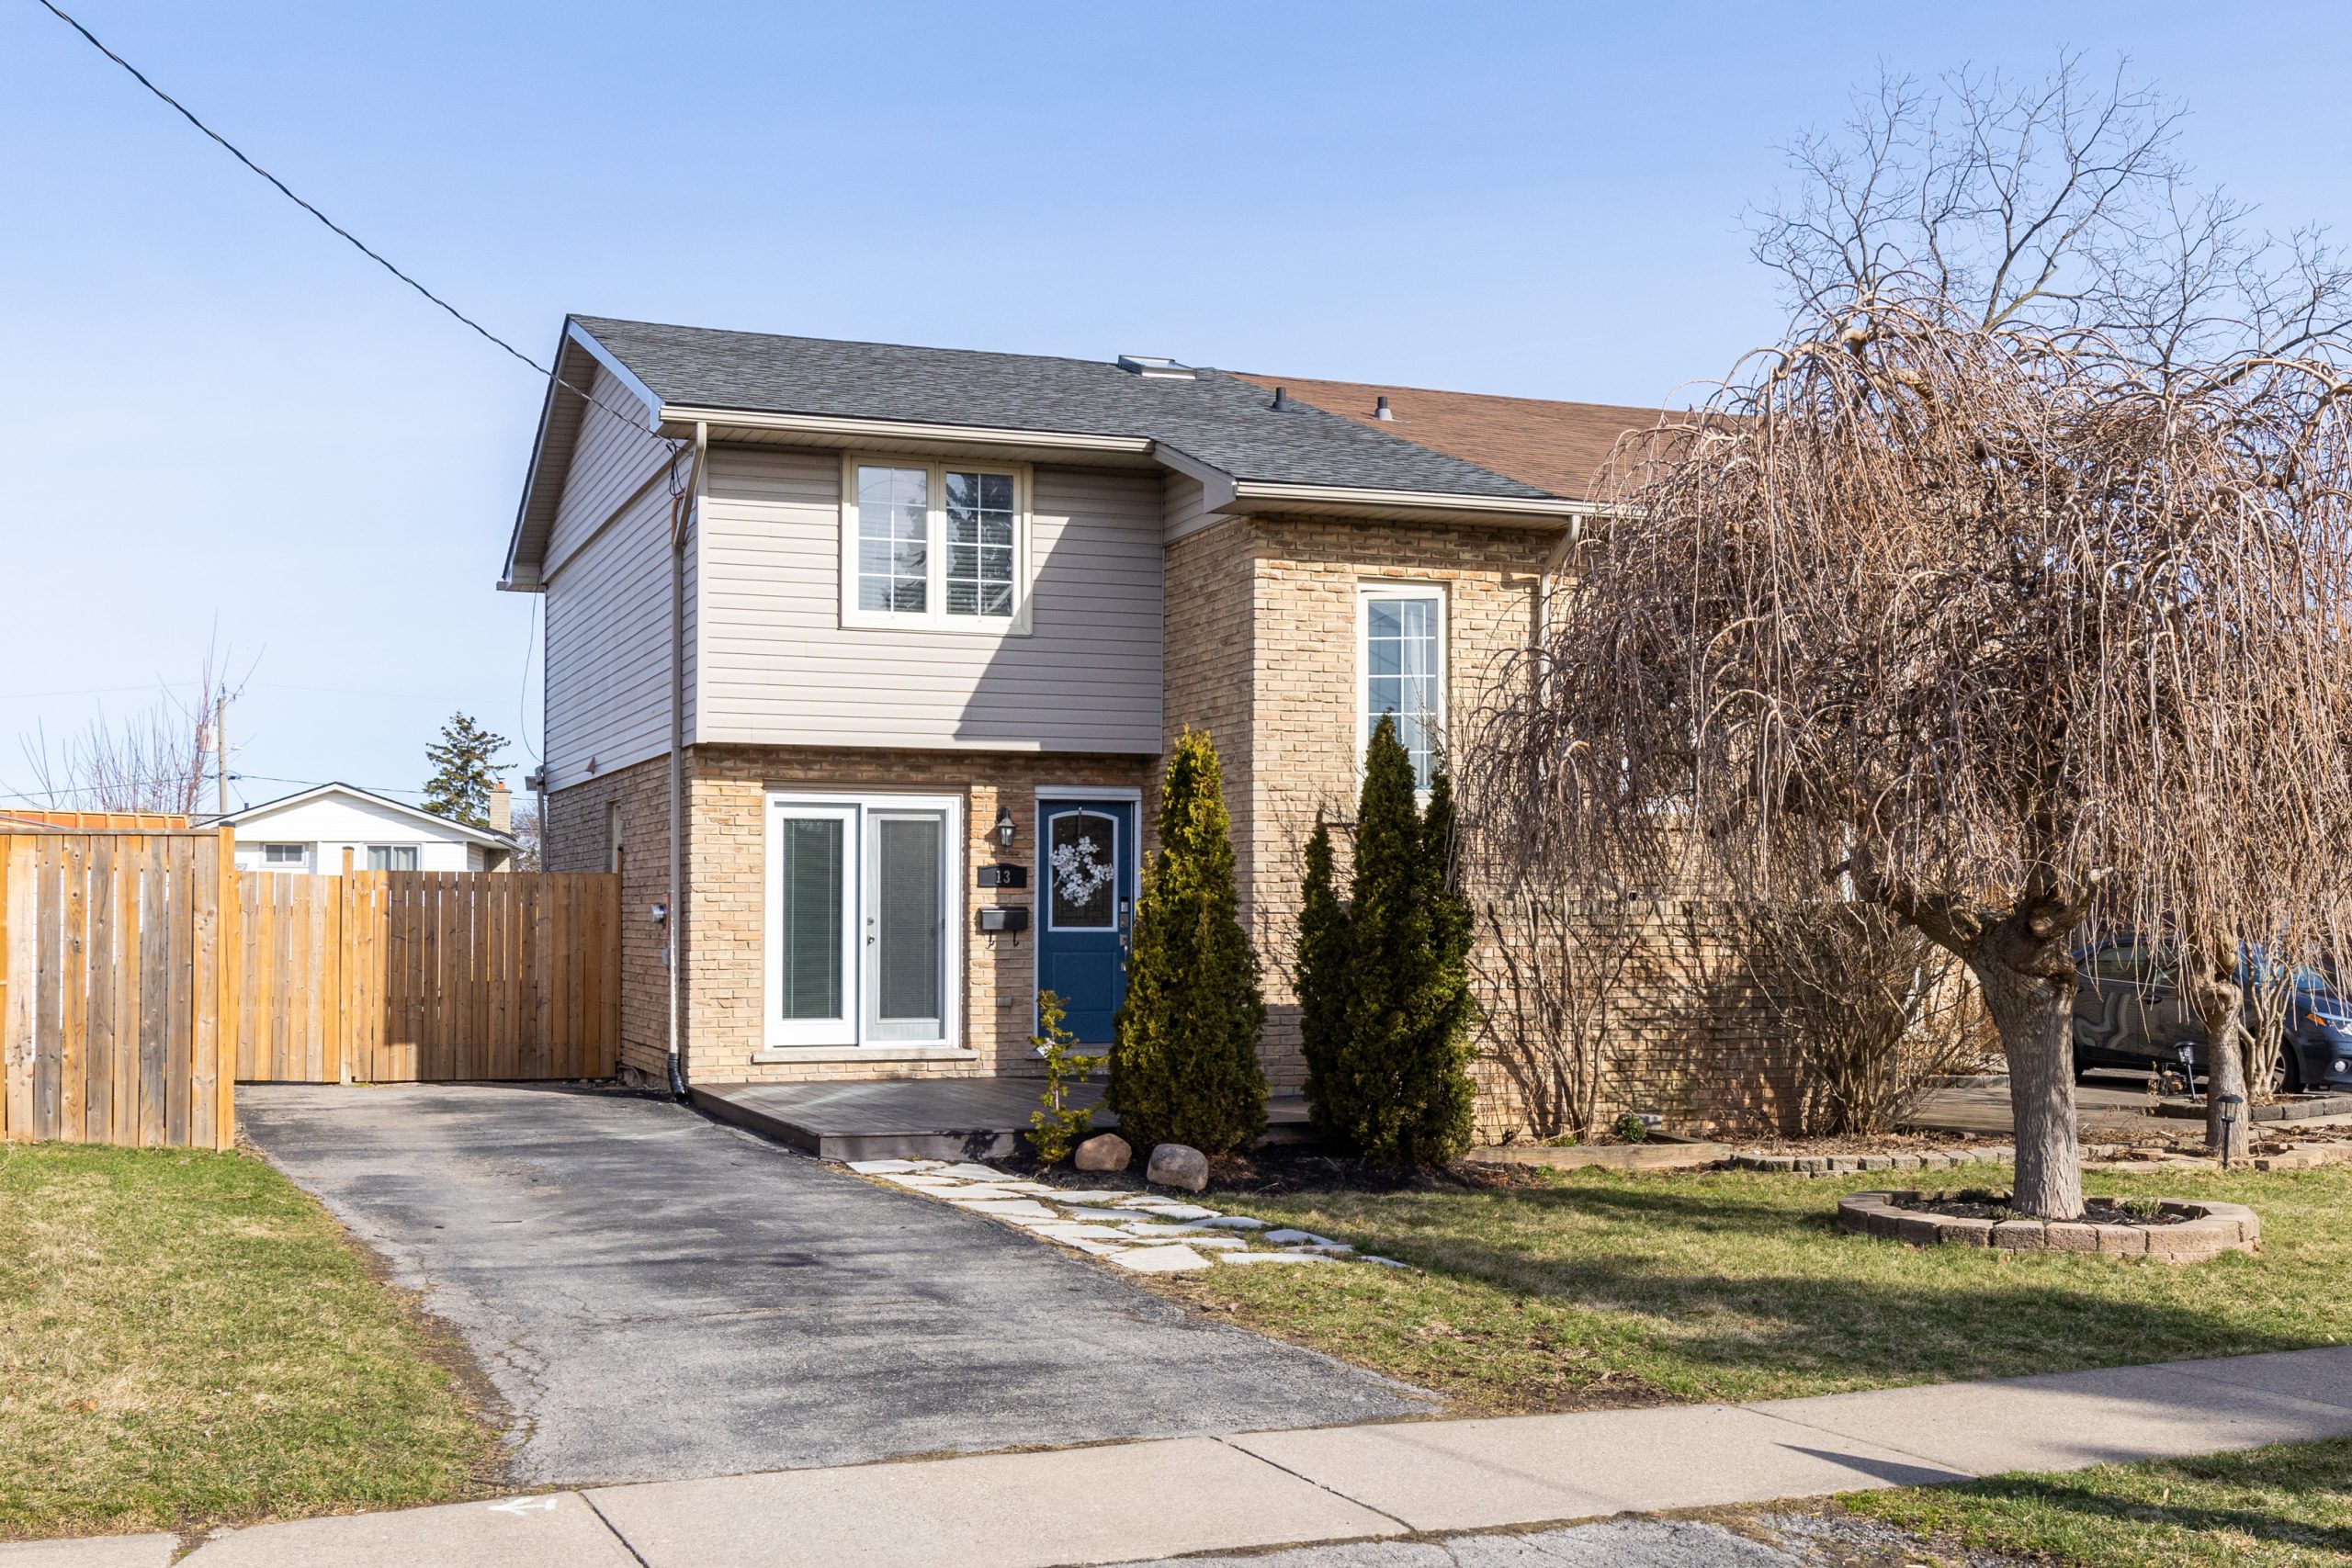 Property image for 13 Green Maple, St. Catharines